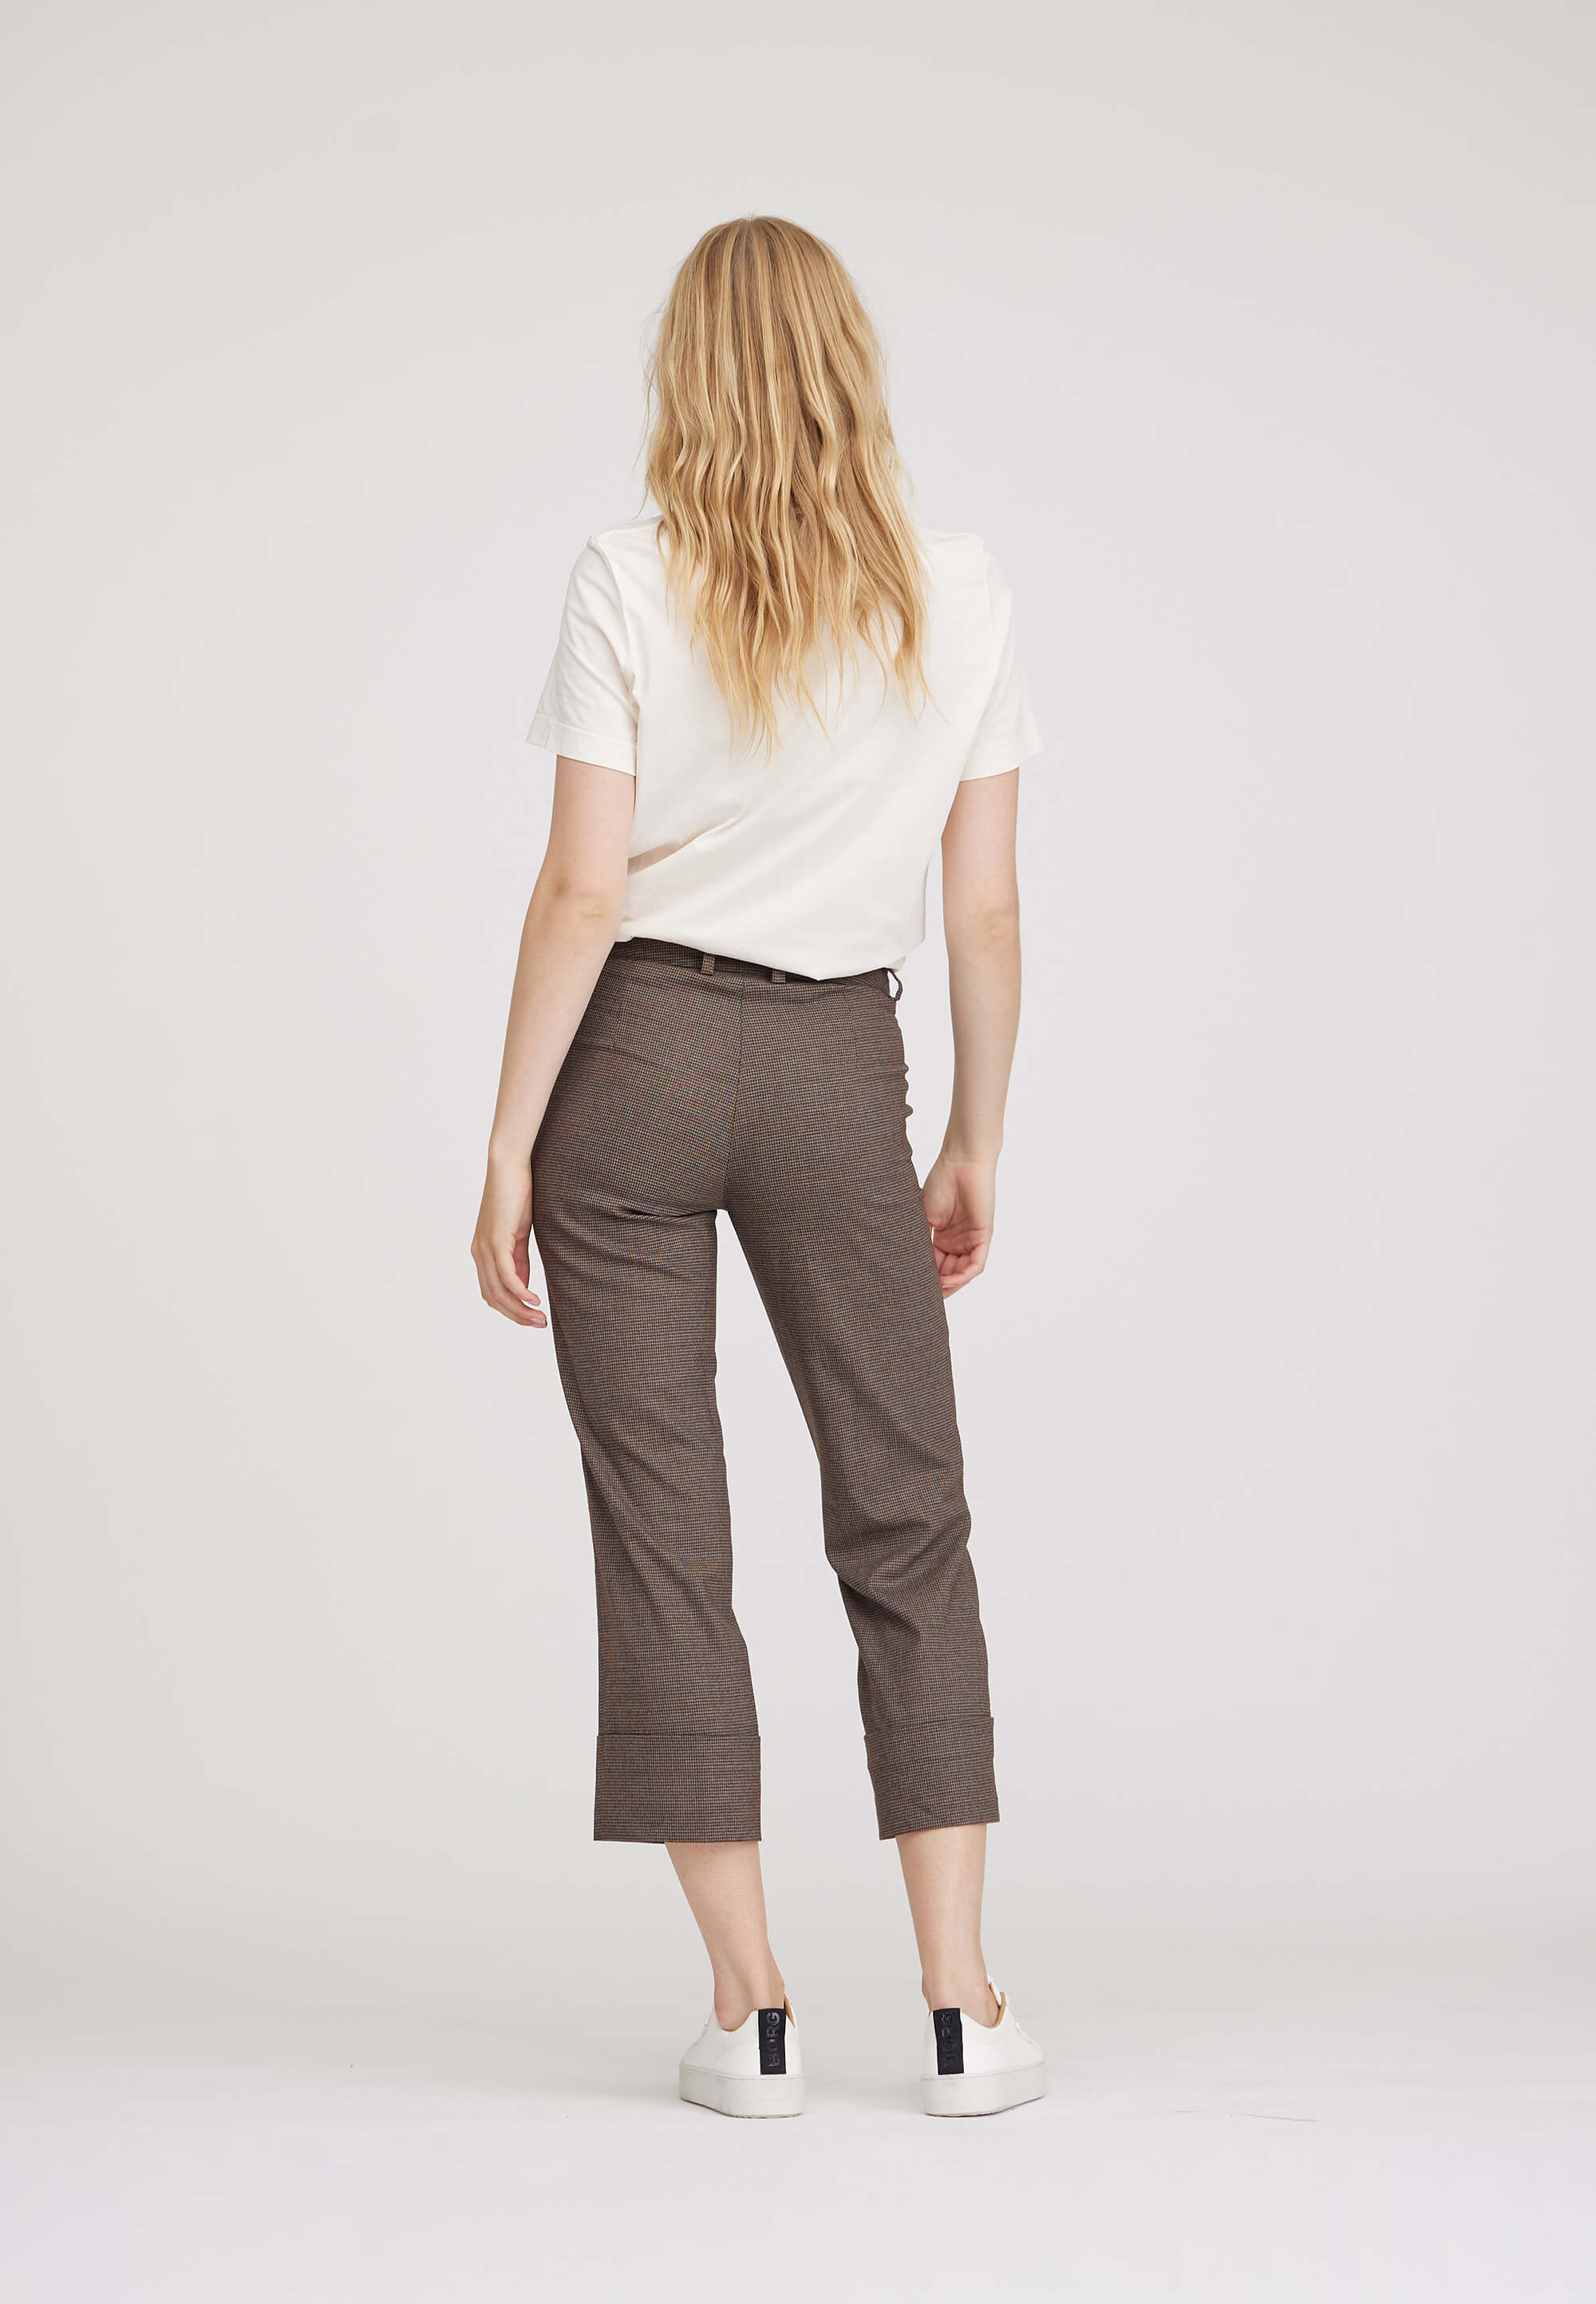 LAURIE Judy Turn-Up Straight Crop Trousers STRAIGHT 84300 Chocolate Chip H. Check